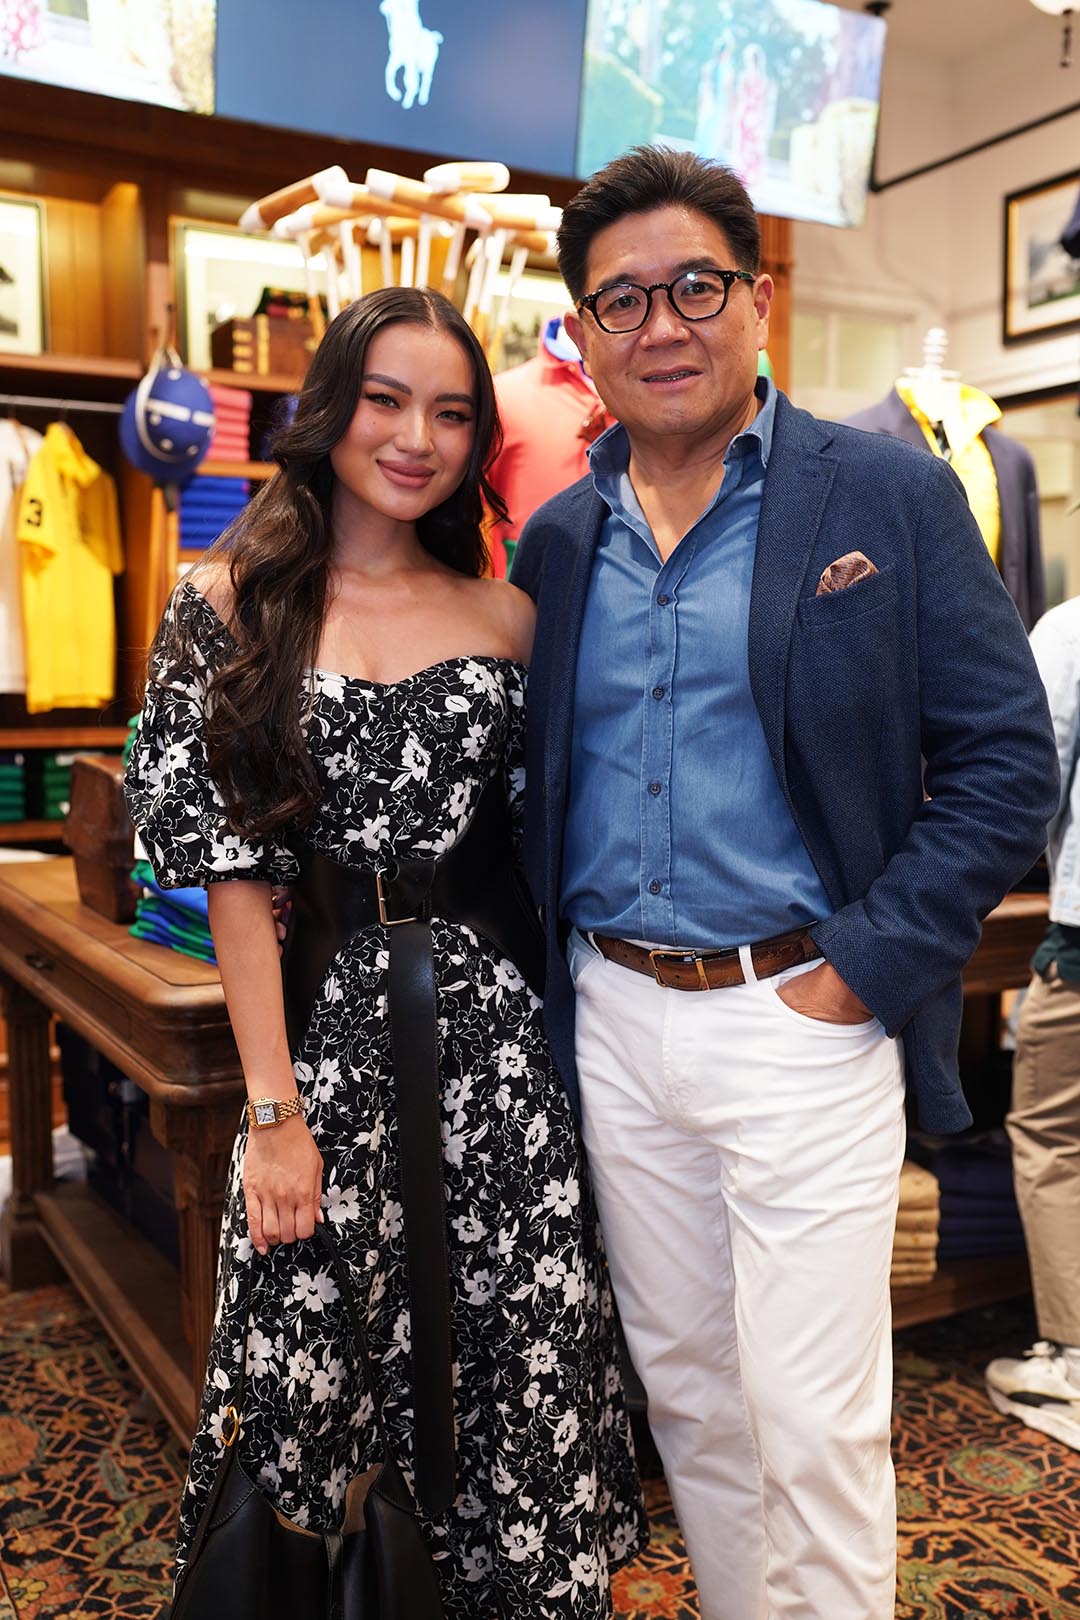 Discover Polo Ralph Lauren's Iconic Heritage at Greenbelt 5 Store